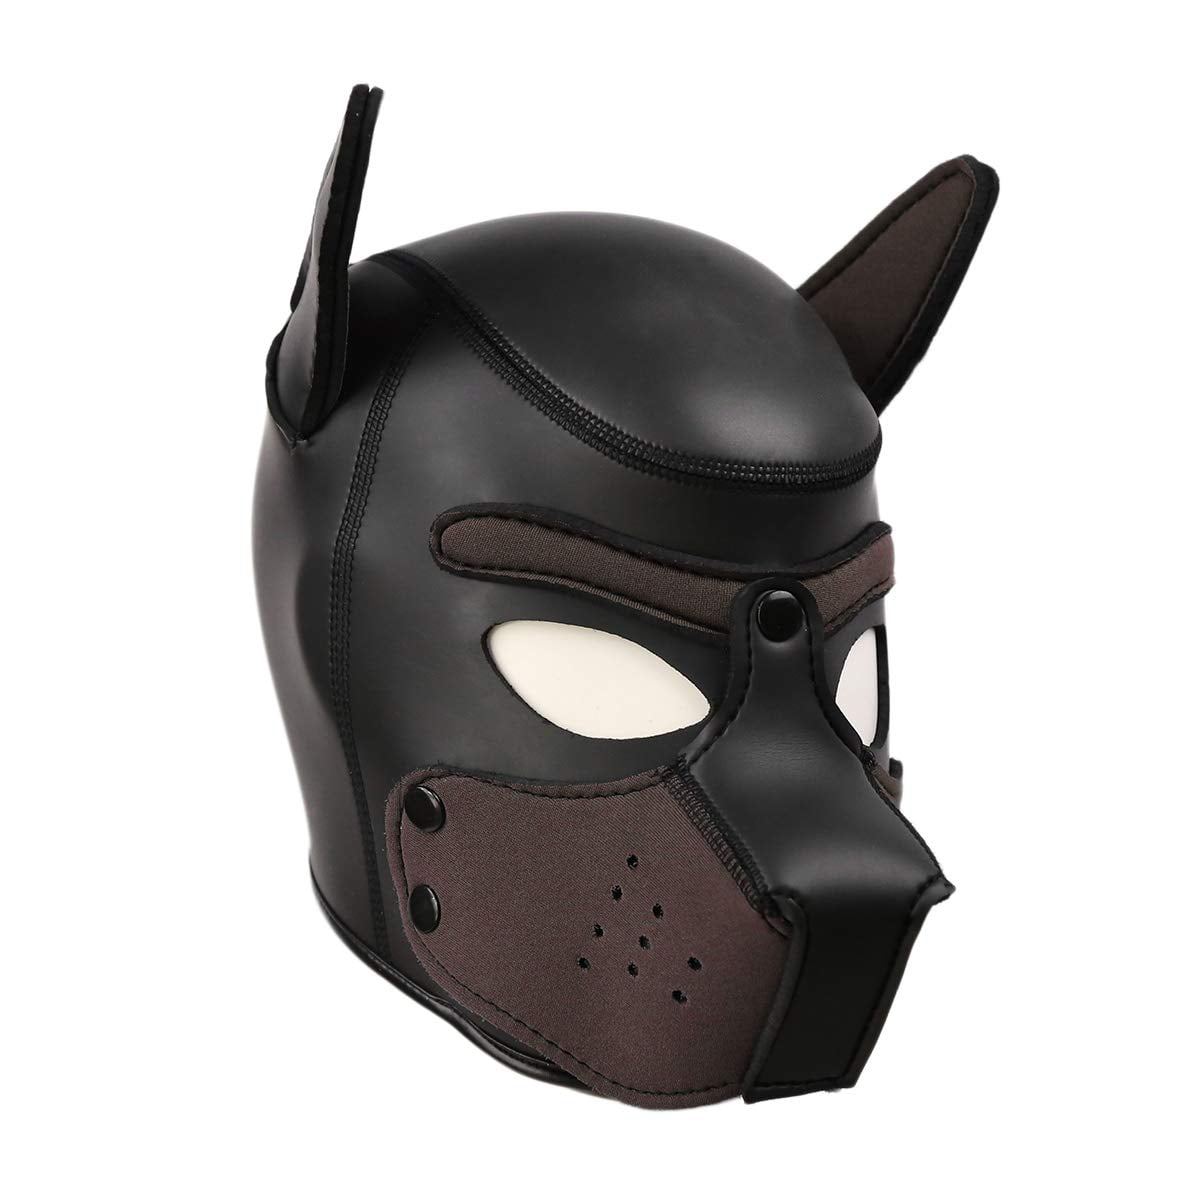 Leather puppy Hood,mask Quality Neopreme detacable snout costume party Size M 